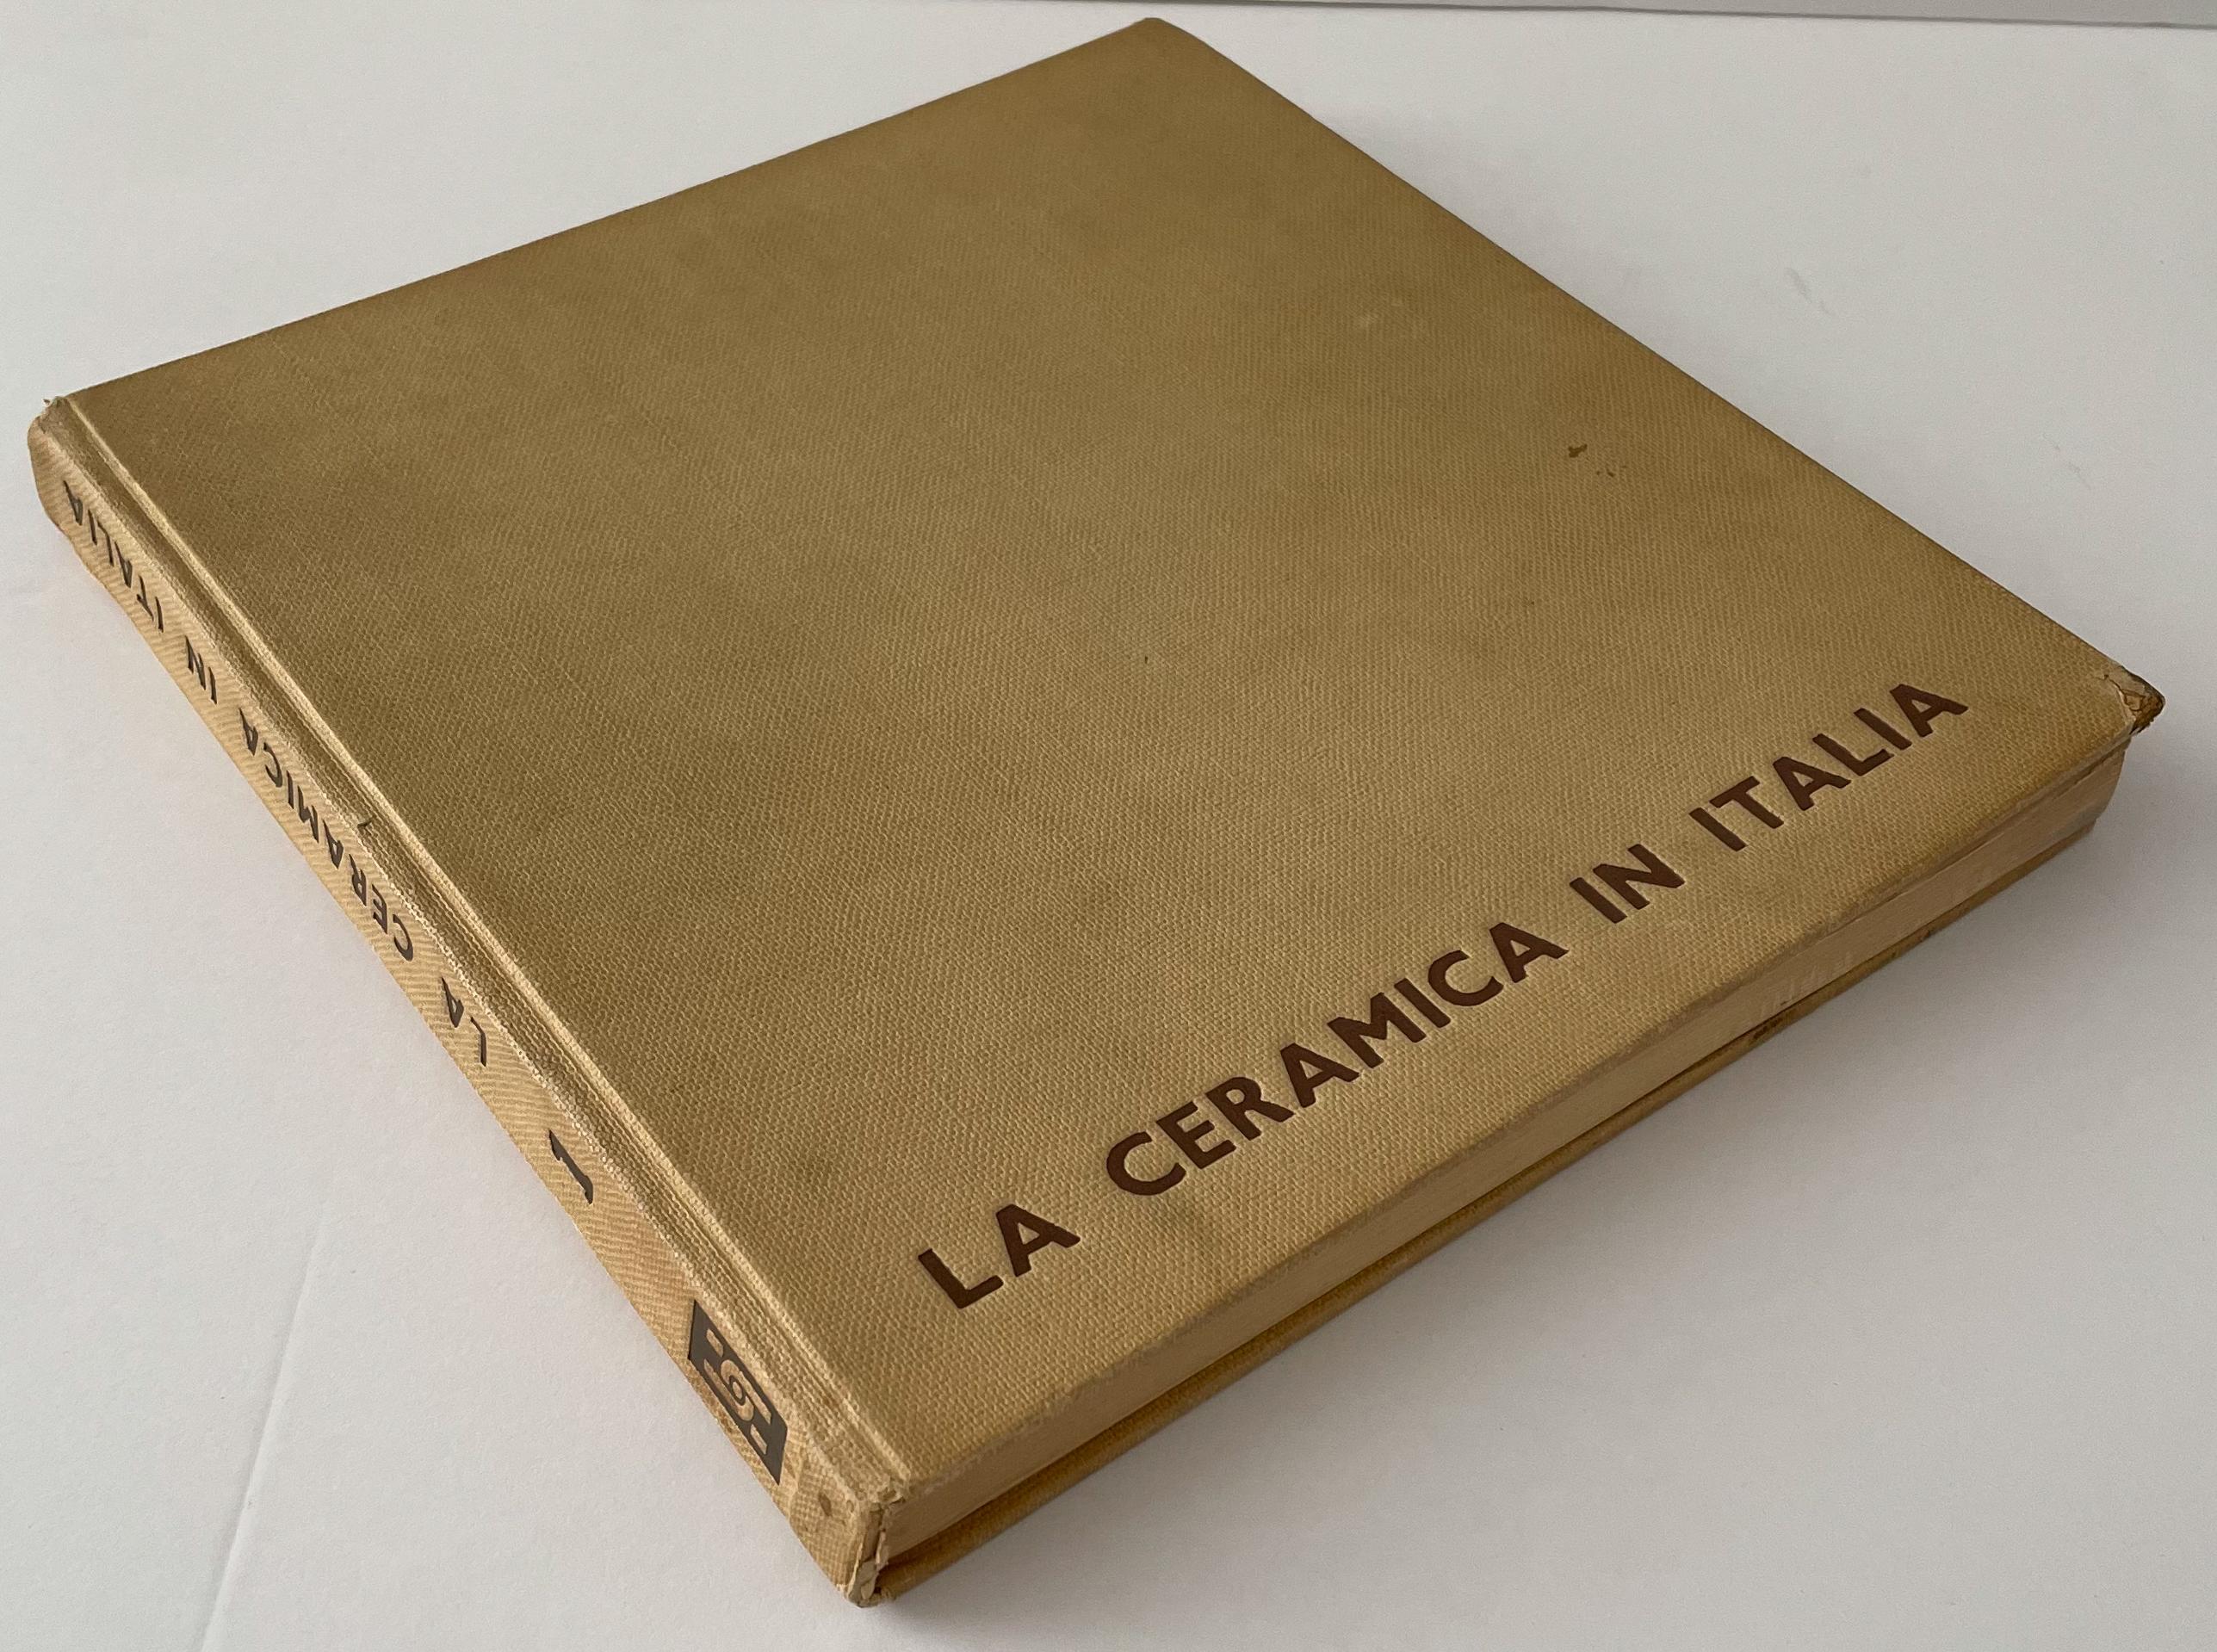 Well-edited and lavishly illustrated survey of mid-century Italian ceramics, written by Hugo Blattler and published in Rome in 1958 by Aristide Palombi as part of the Arti Pratiche series, intended to contribute to an examination in depth of the